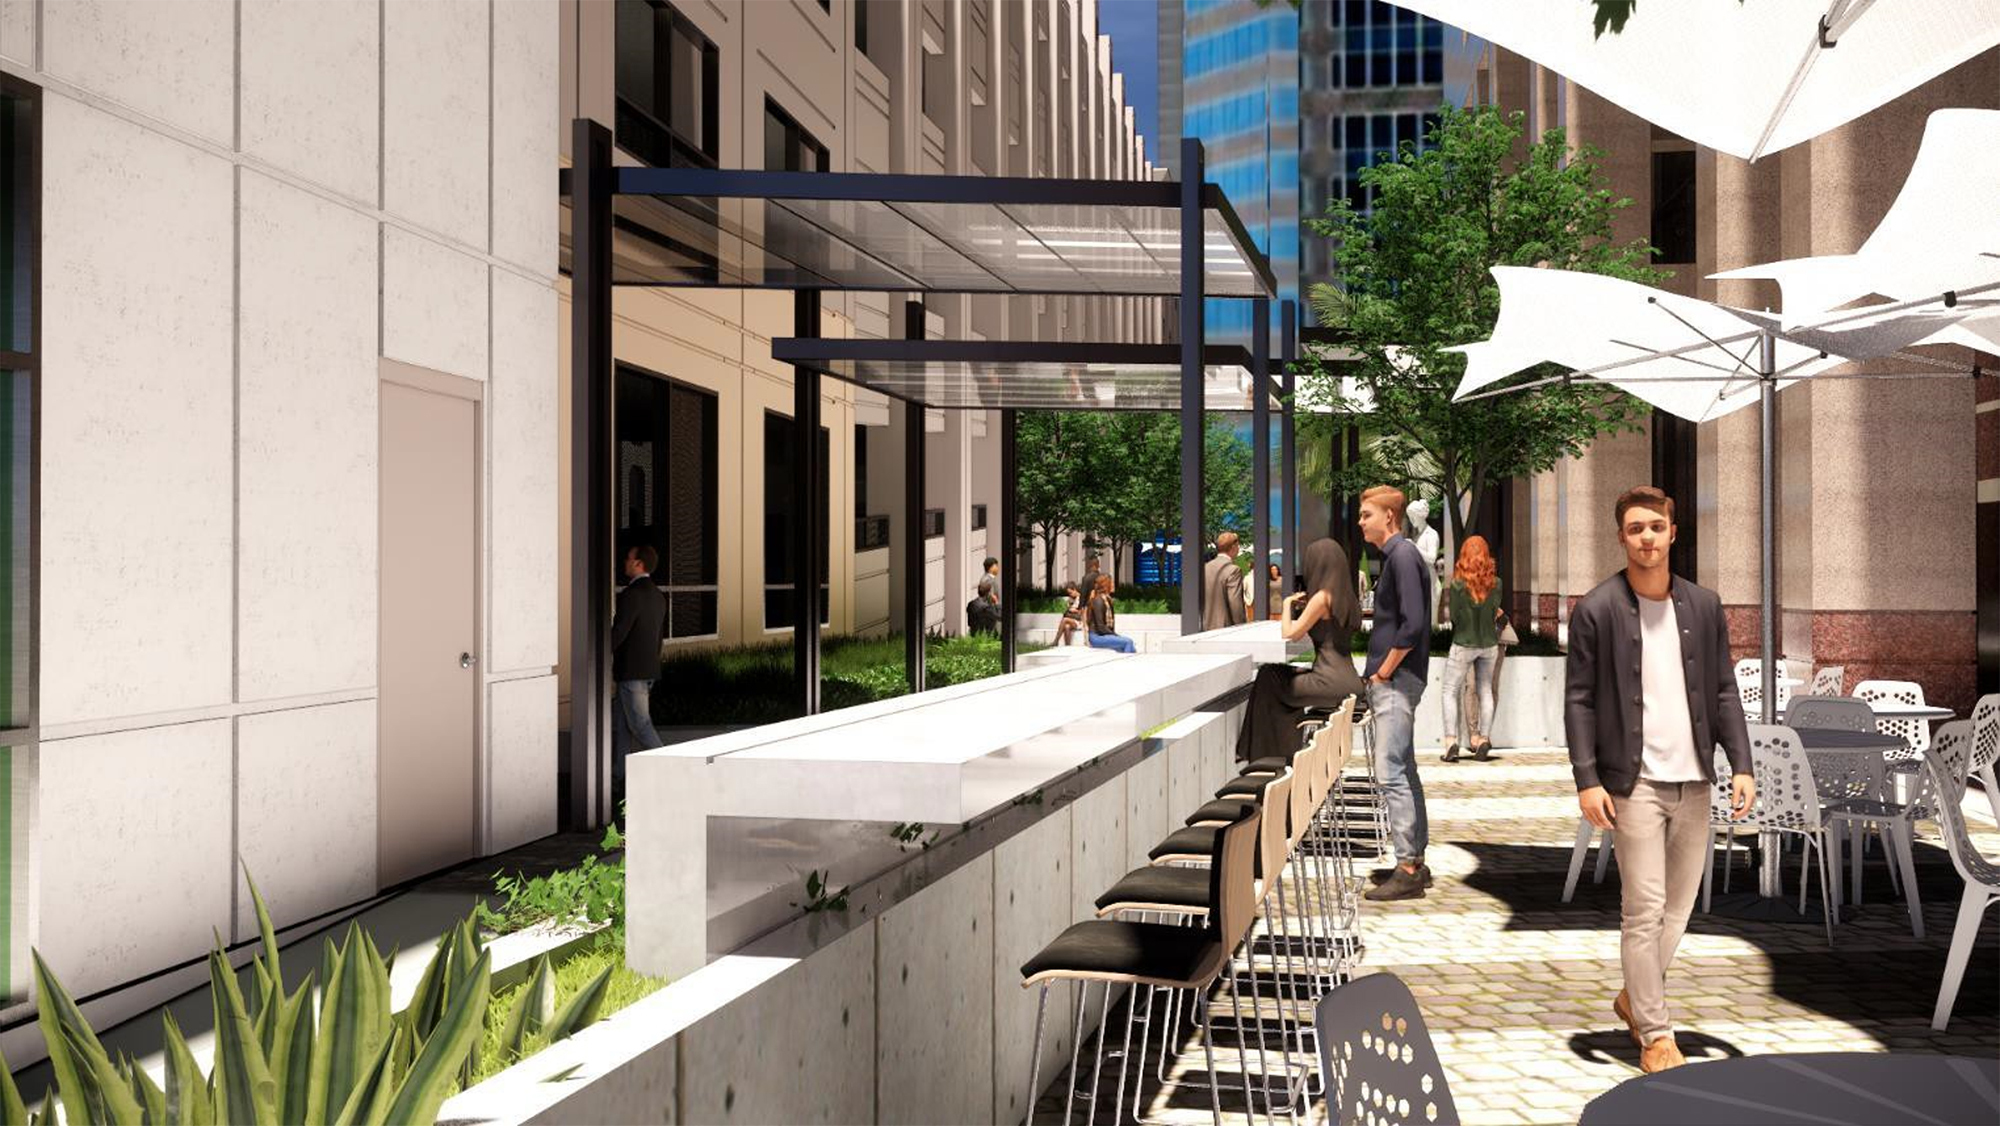 The breezeway will feature planters, sidewalk, hardscape space and an outdoor seating area.